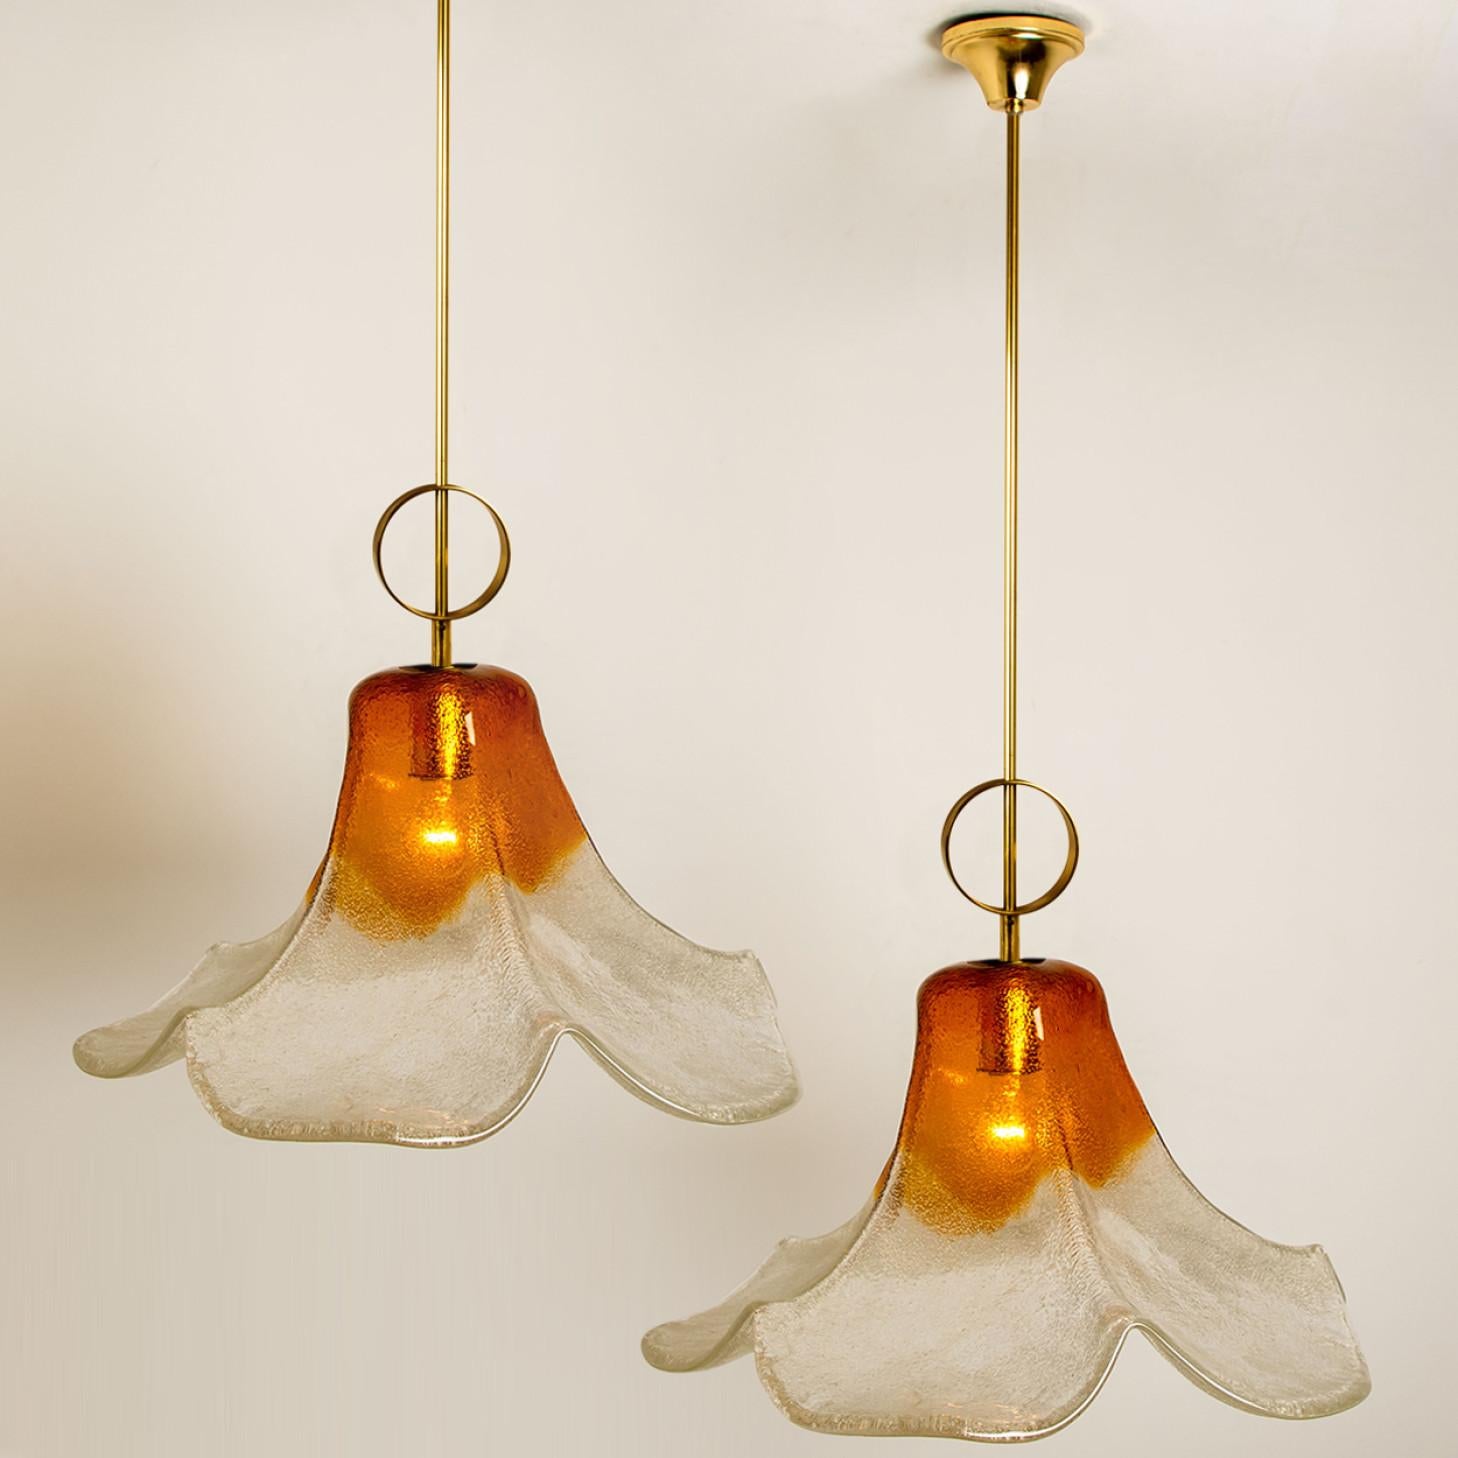 Pendant lamp model LS185 by Carlo Nason for Mazzega.
One large crystal clear and orange colored flower. This beautiful piece is made of thick handmade Murano glass.

We can deliver different kind of rods and cords (see images). Please notice the